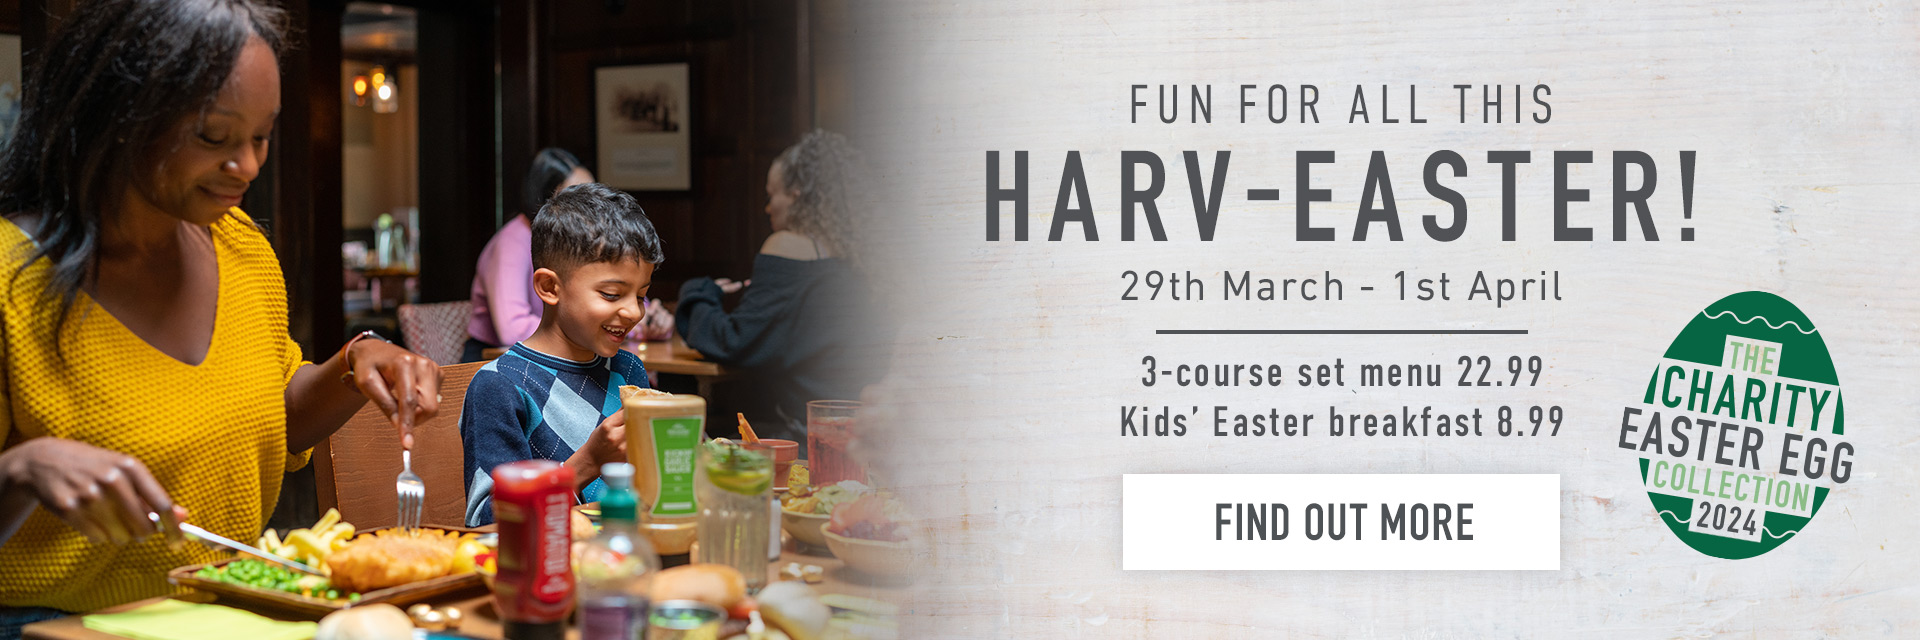 Easter at Harvester Flamstead in St Albans